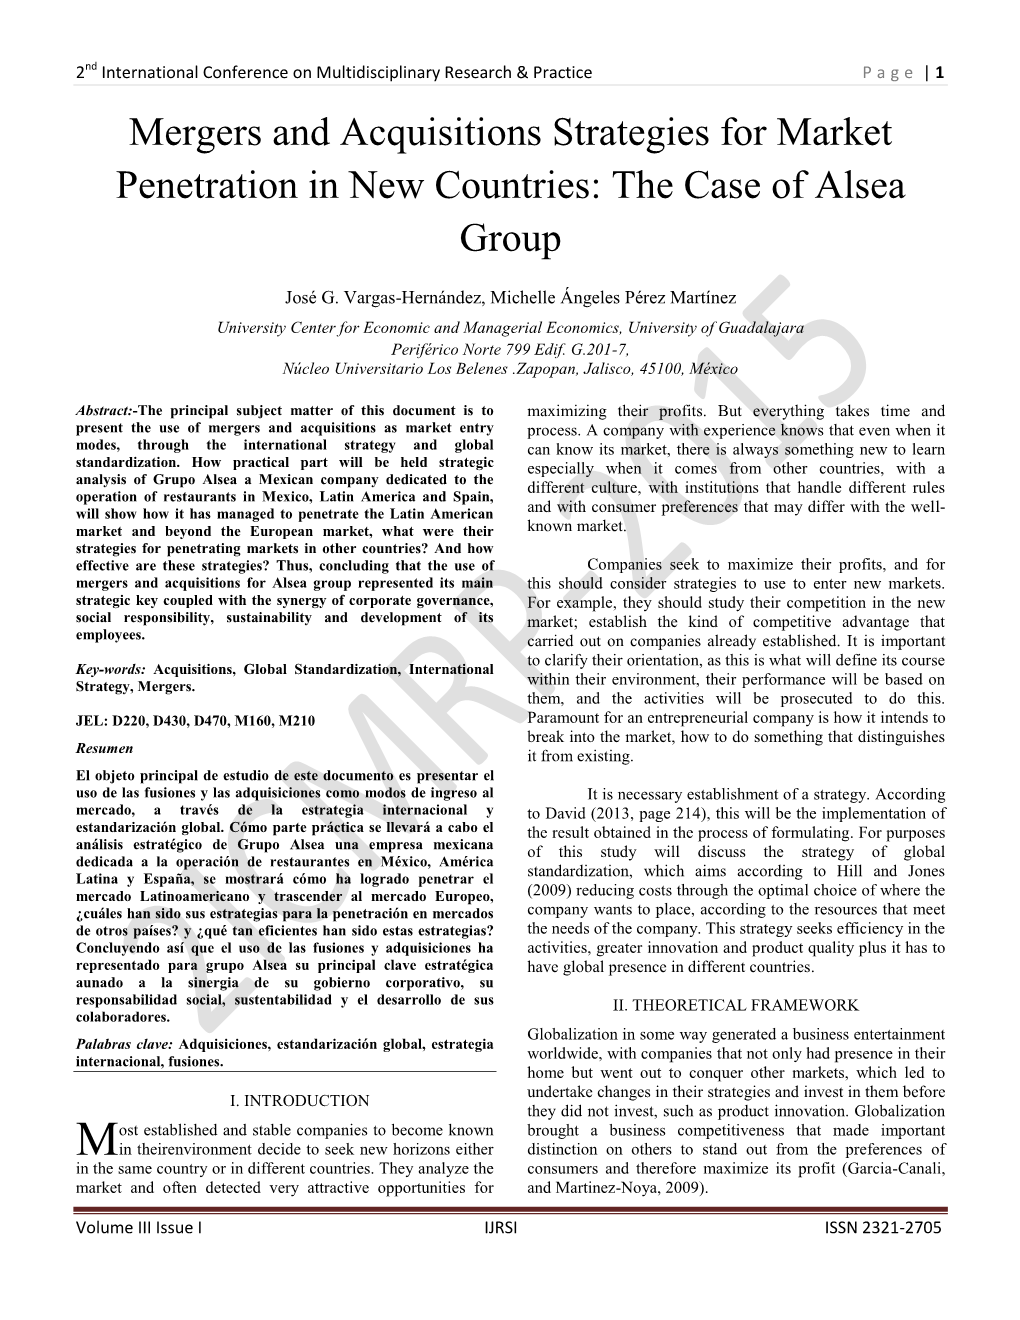 Mergers and Acquisitions Strategies for Market Penetration in New Countries: the Case of Alsea Group